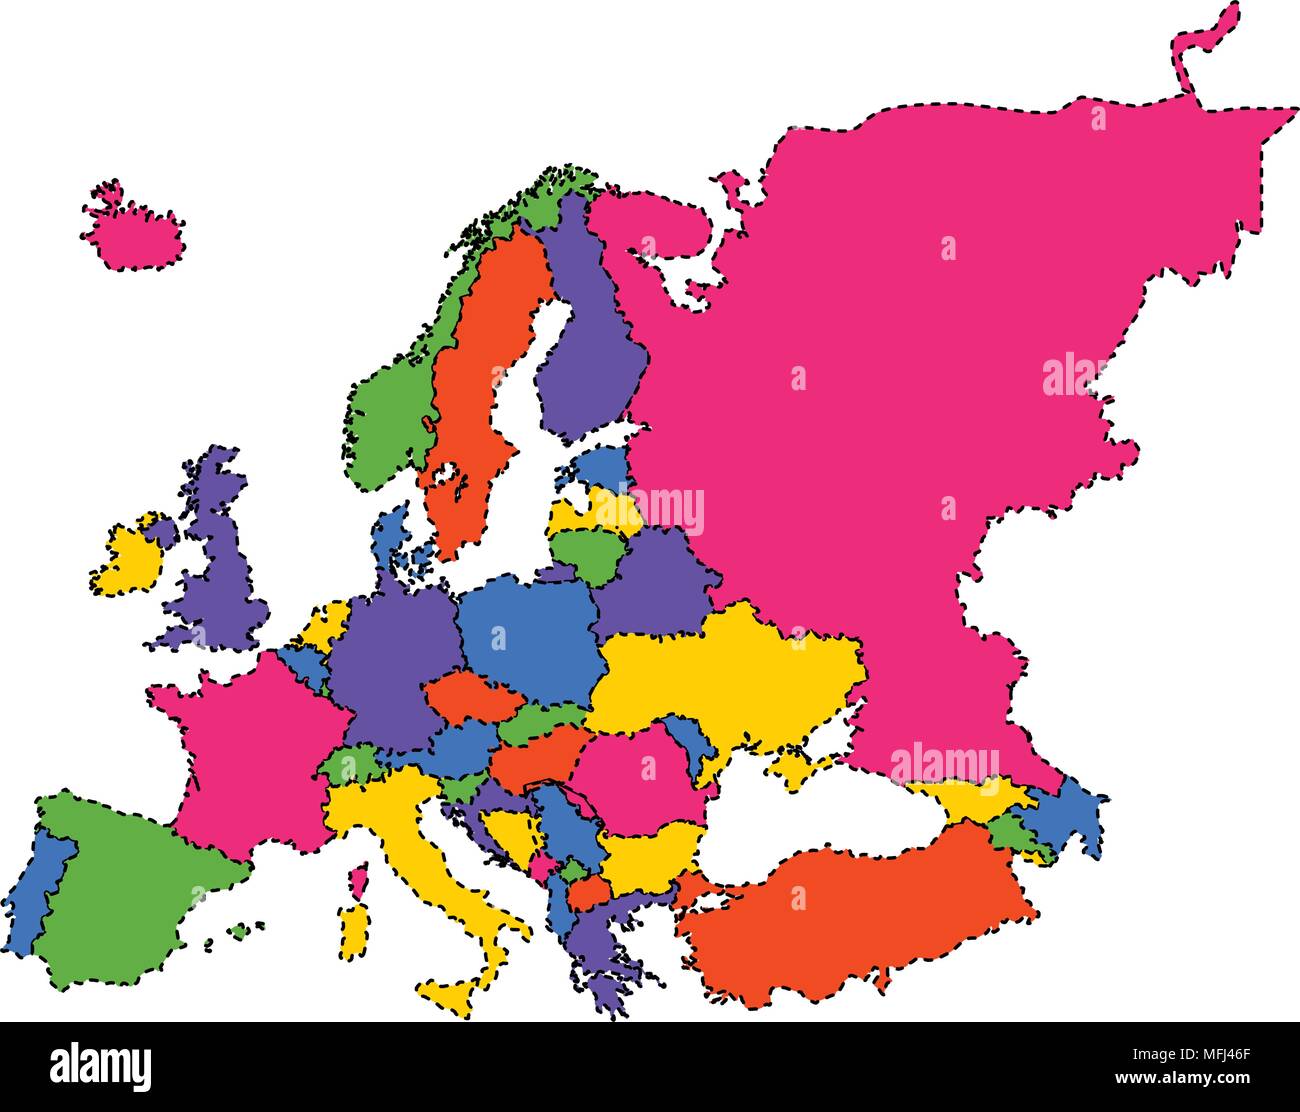 political-map-of-europe-stock-vector-image-art-alamy